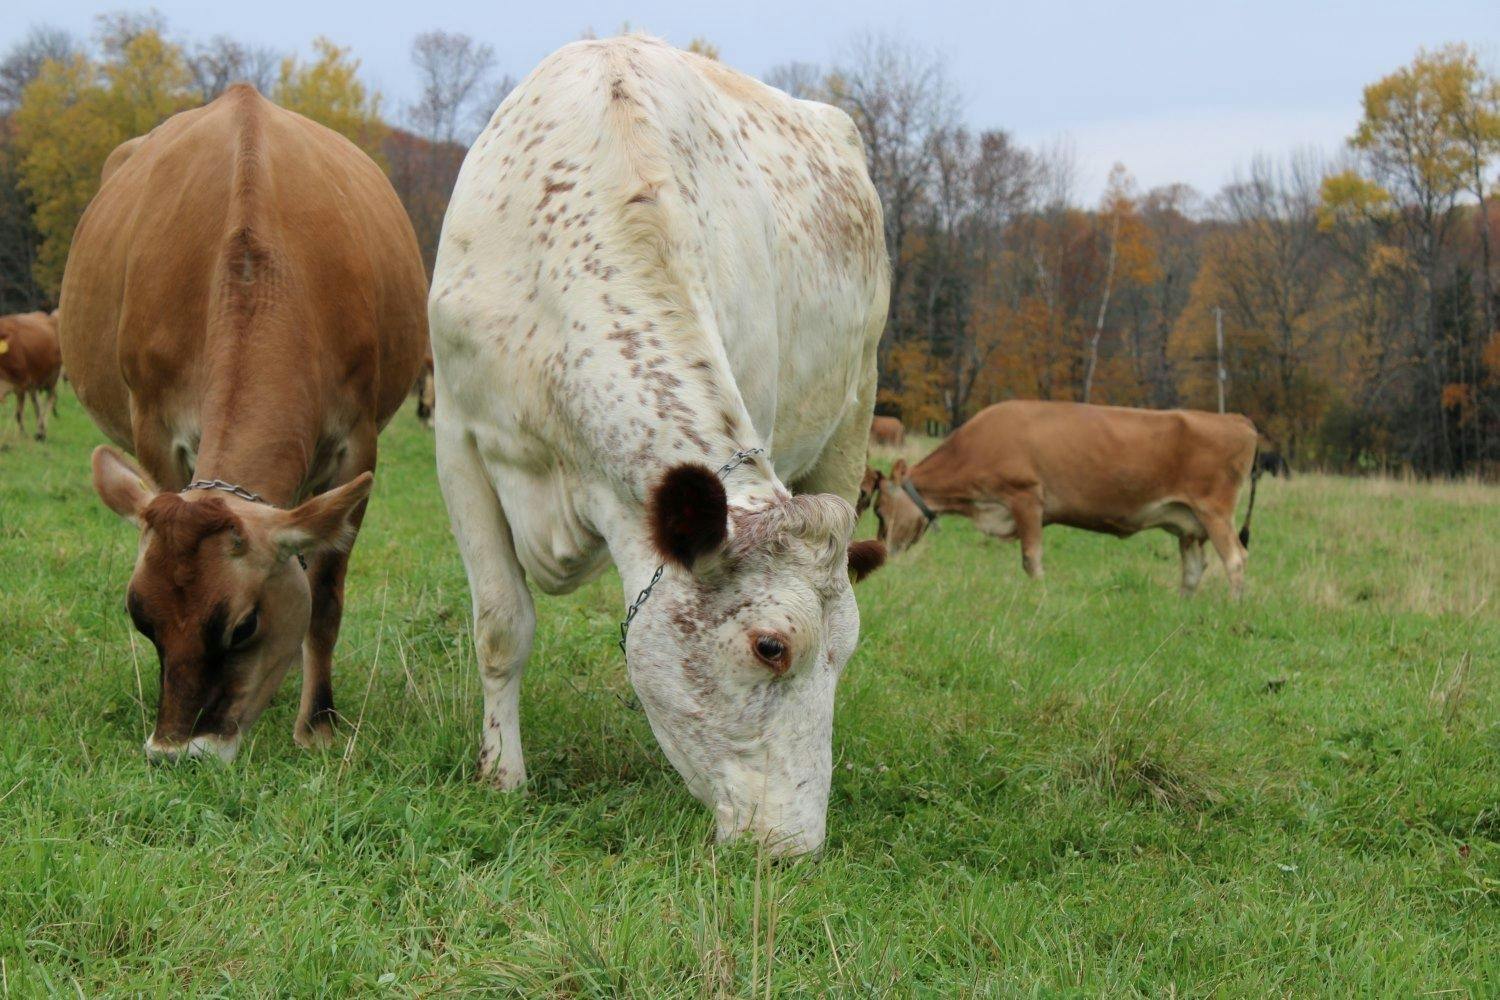 Cows eat grass on pasture at the Roberge organic farm in Vermont.